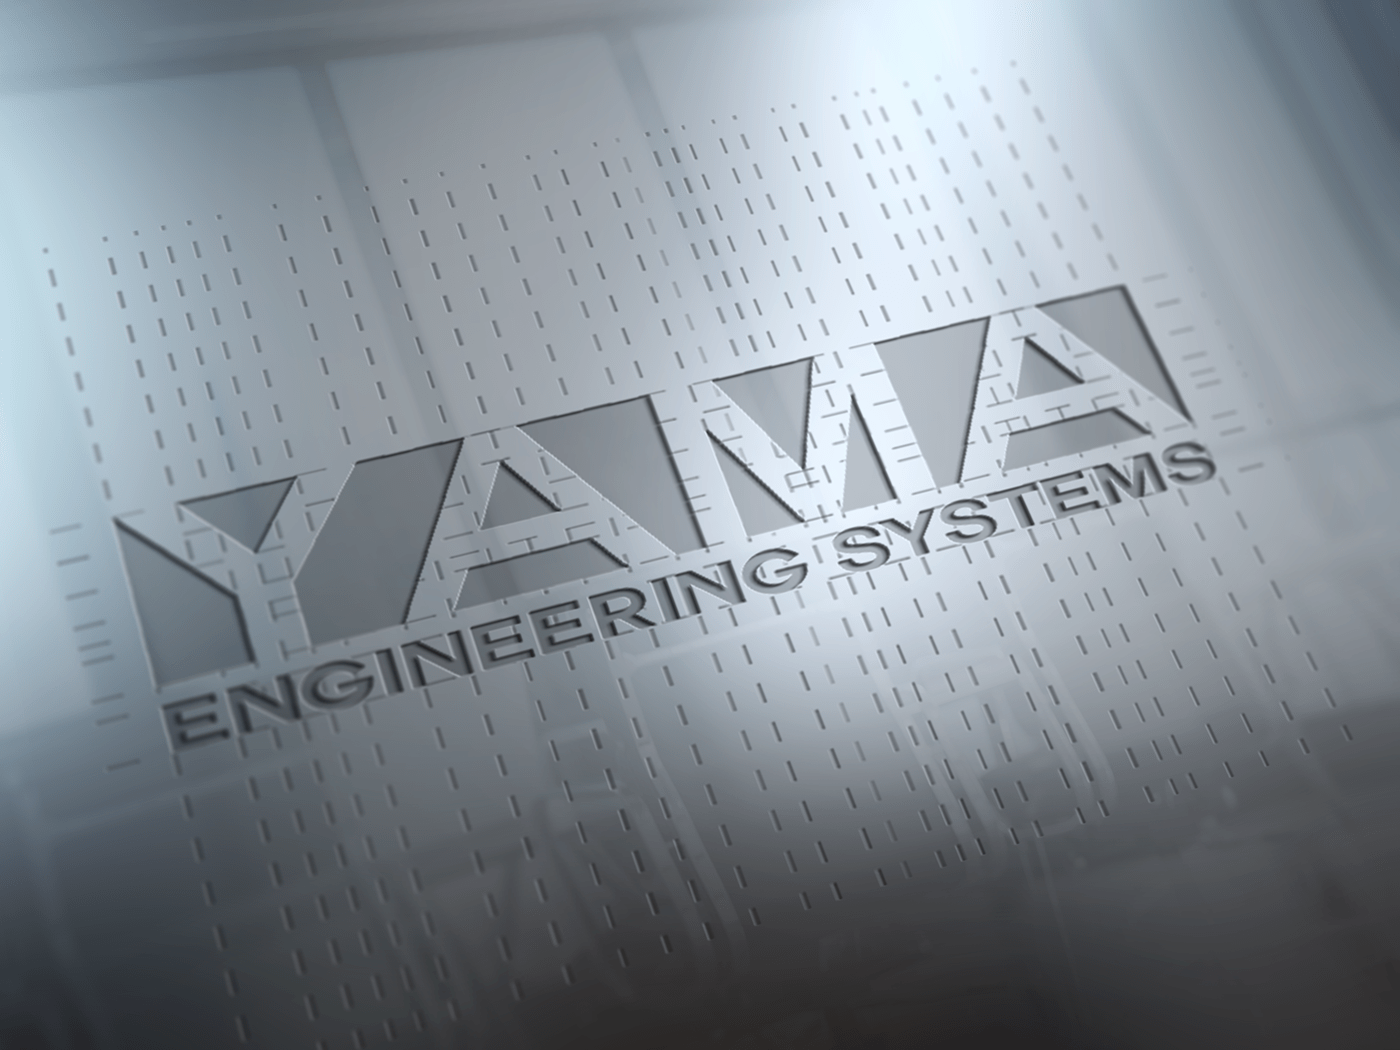 construction contracting engineering systems fire extinguishers Fire fighting systems fire protection Fire pumps supplies Trading Company yama